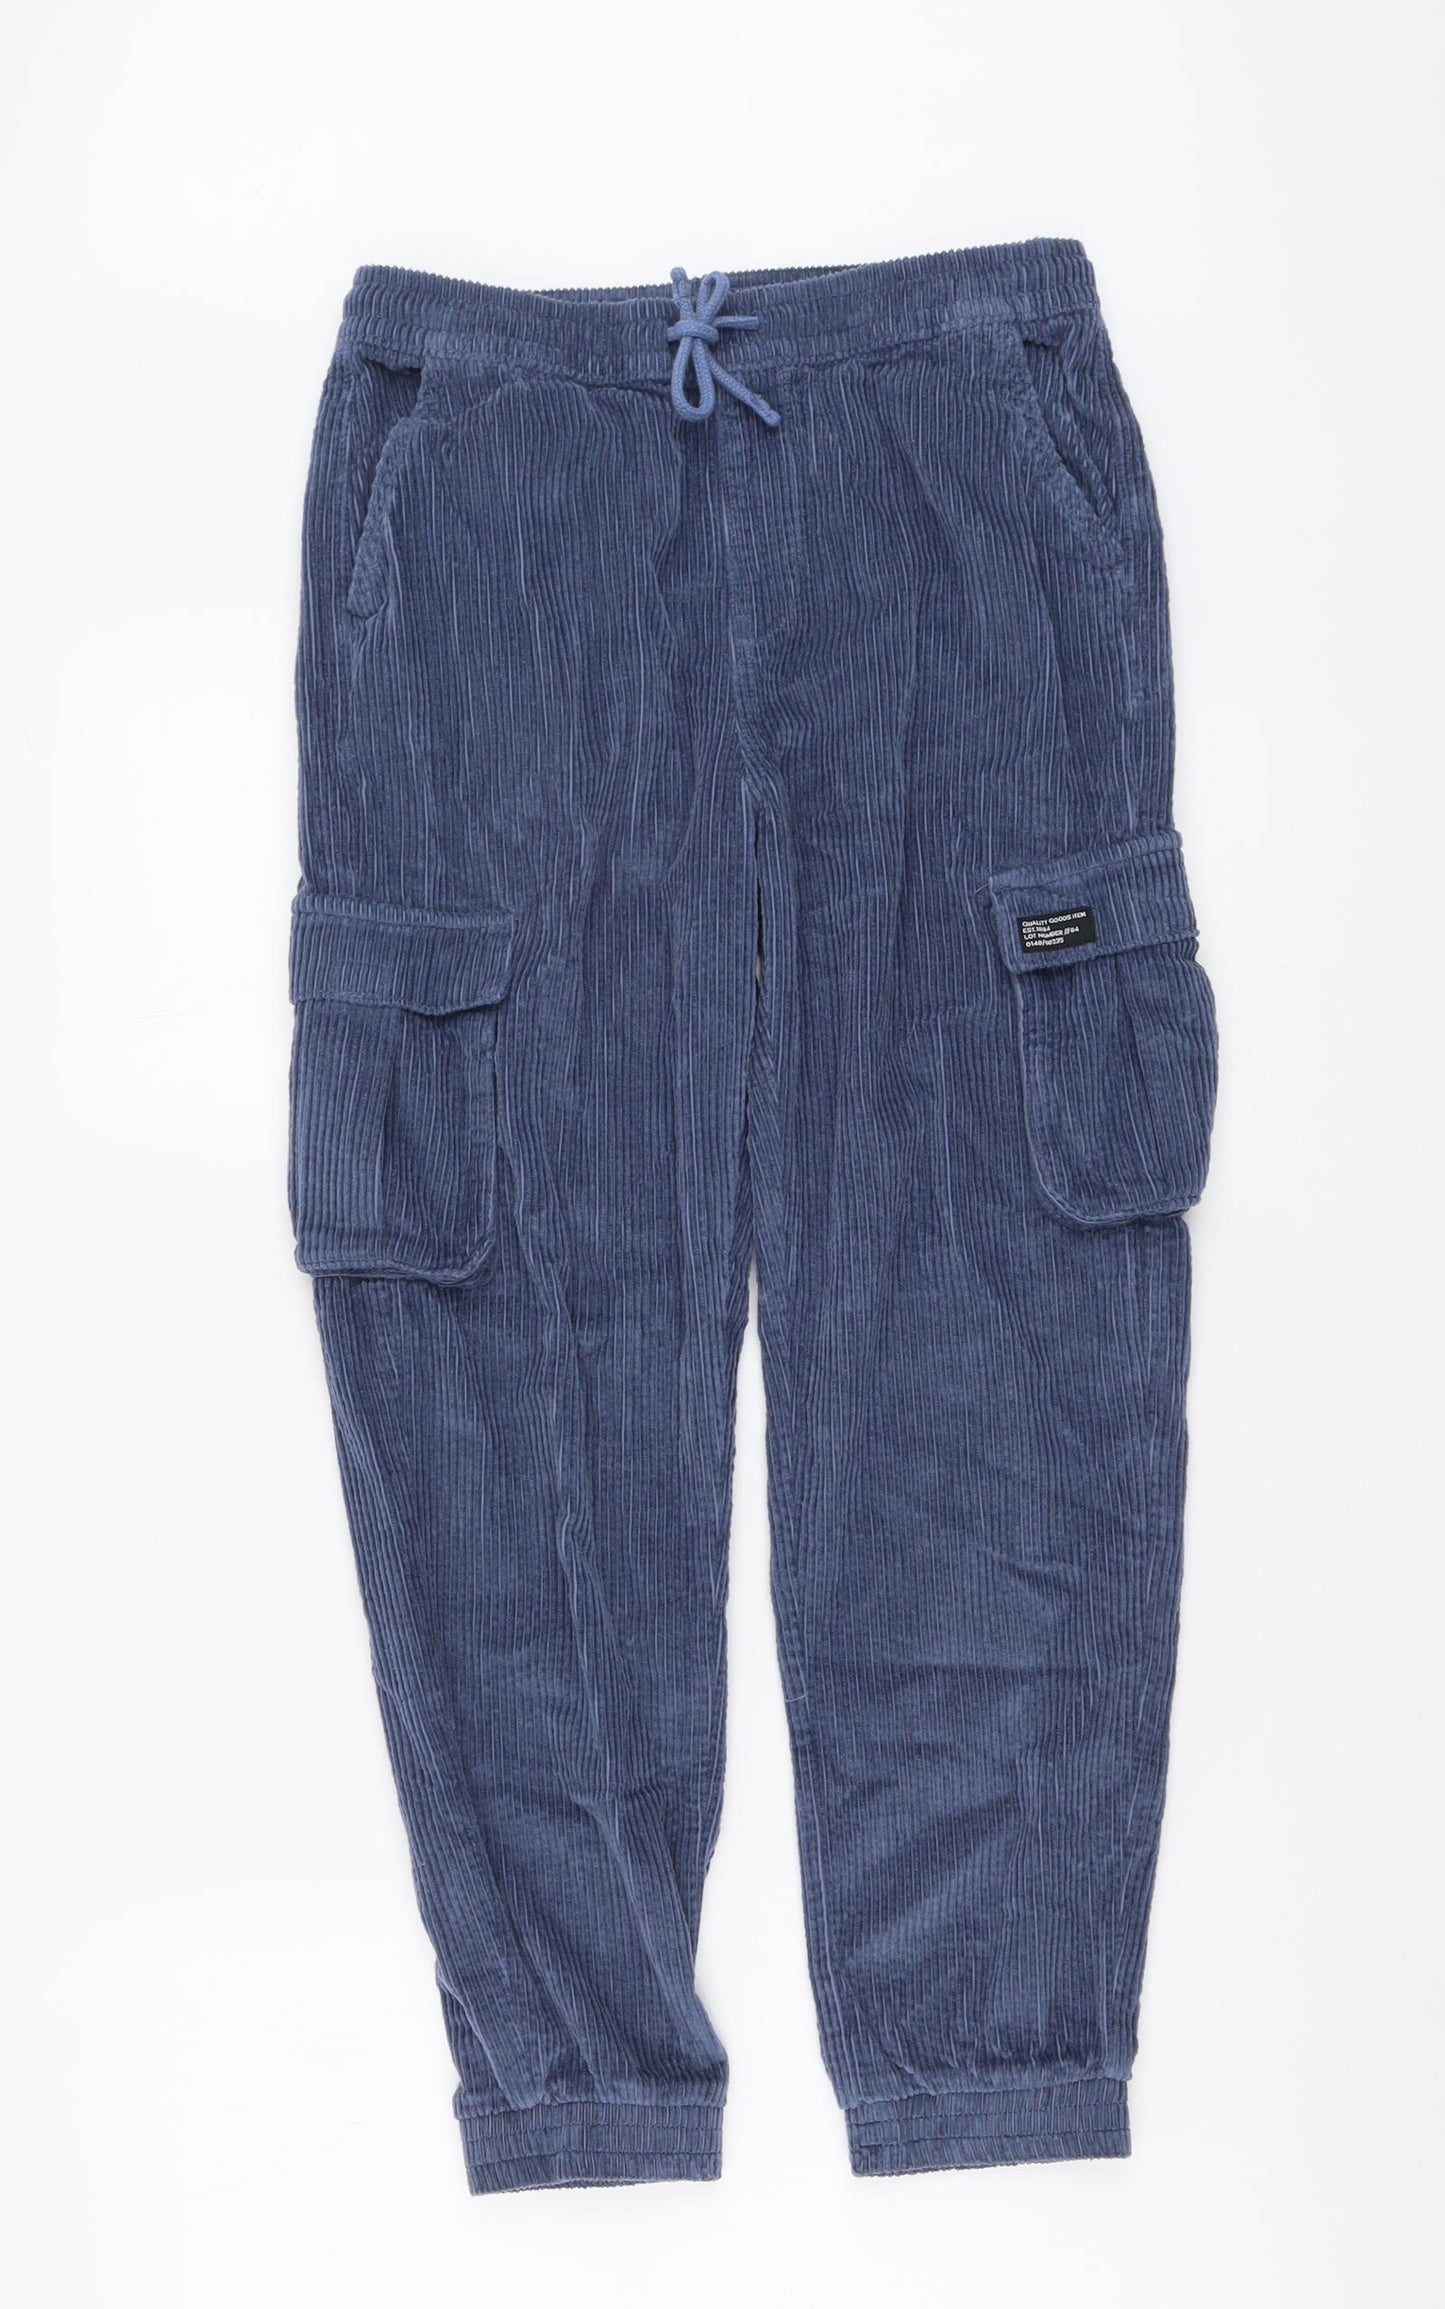 Marks and Spencer Boys Blue Cotton Cargo Trousers Size 12-13 Years Regular Drawstring